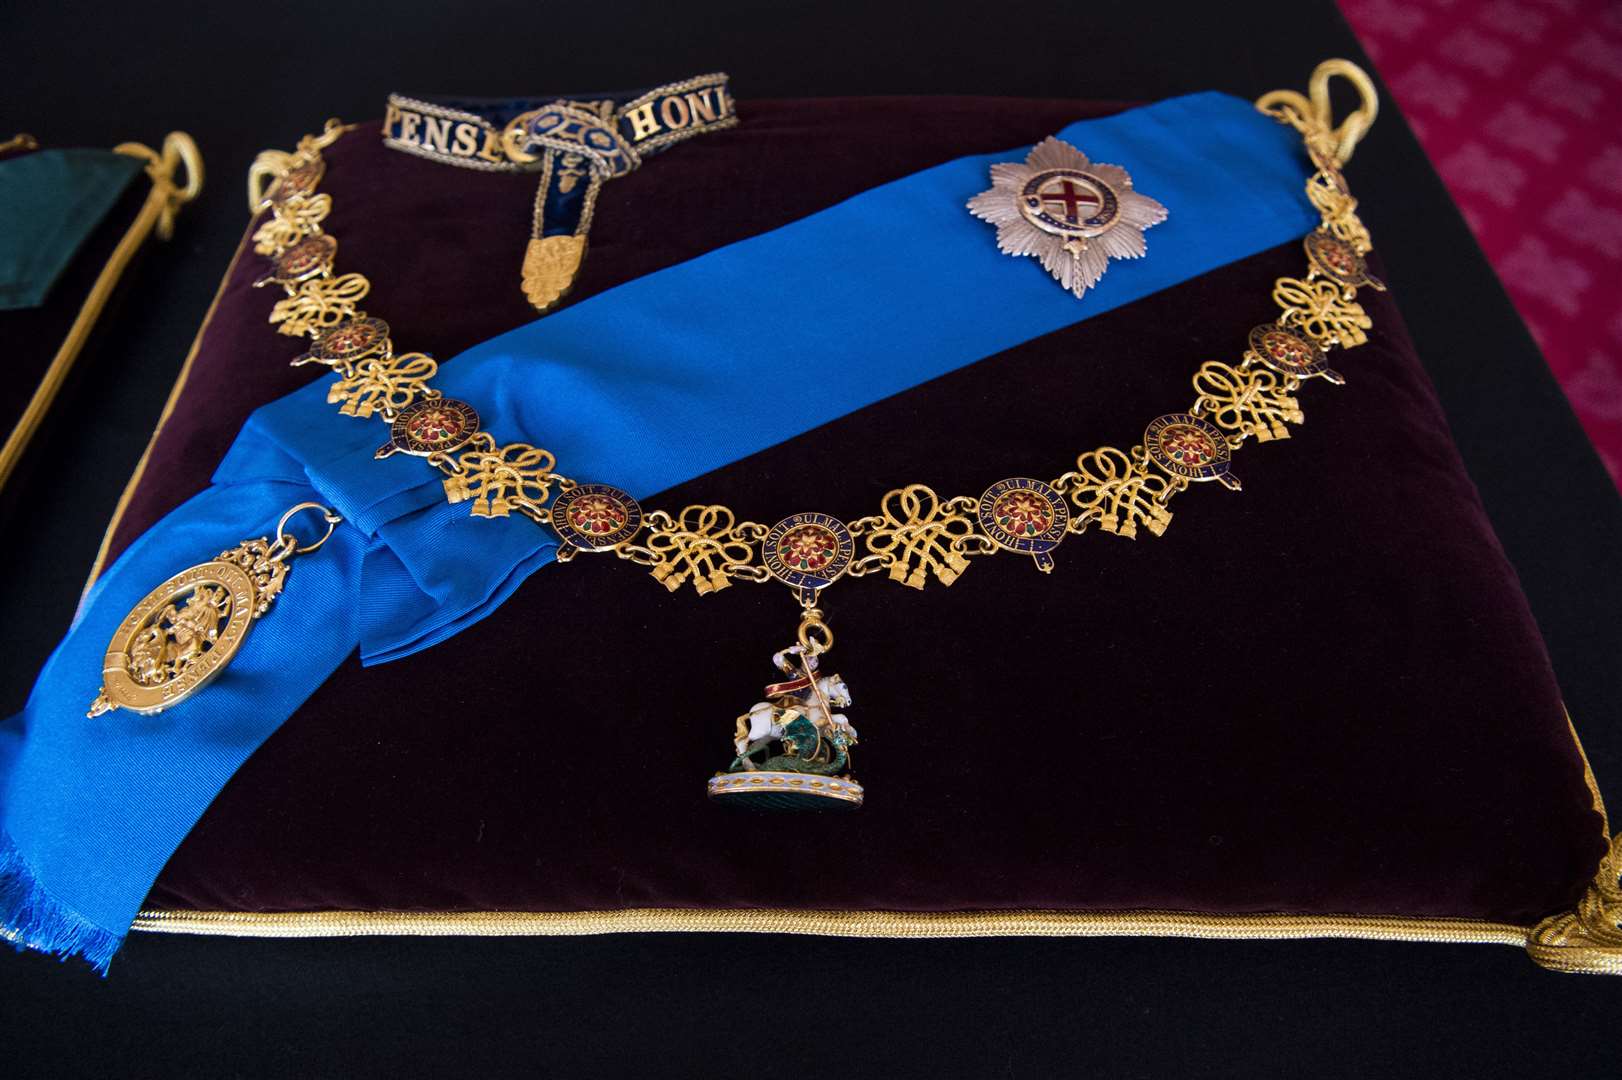 The Garter Collar and Greater George, and the Garter Breast Star and Lesser George sewn onto a cushion (Kirsty O’Connor/PA)